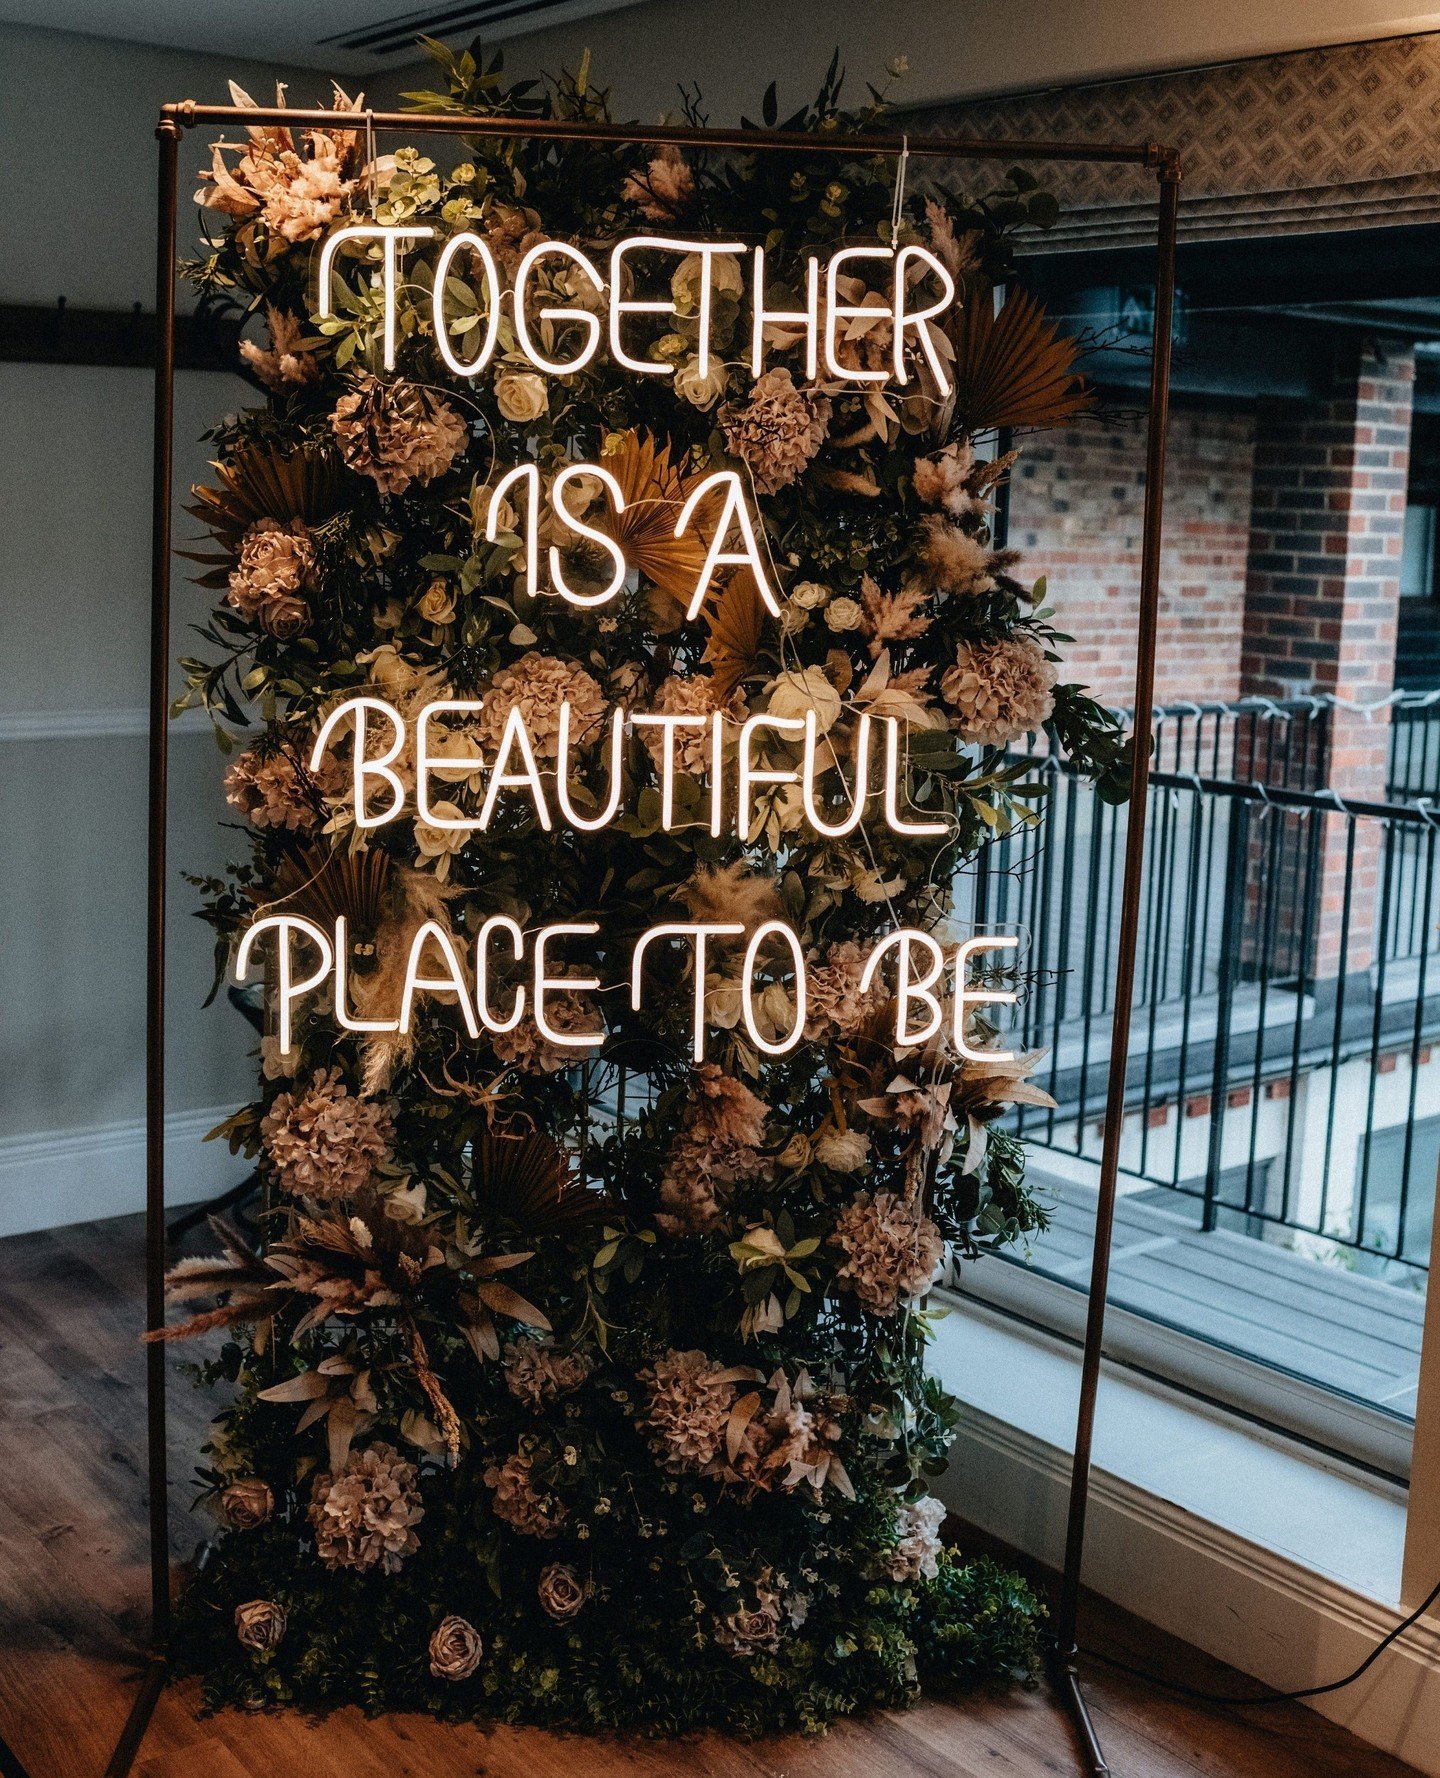 We love a neon sign as a focal point at a wedding or event. Making a great photo opportunity for guests too. Take a look on our website for other neon sign options you could have.⁠
⁠
Photograohy by @jacobmalinskiphoto⁠
⁠
.⁠
.⁠
.⁠
.⁠
.⁠
.⁠
.⁠
⁠
#luxur